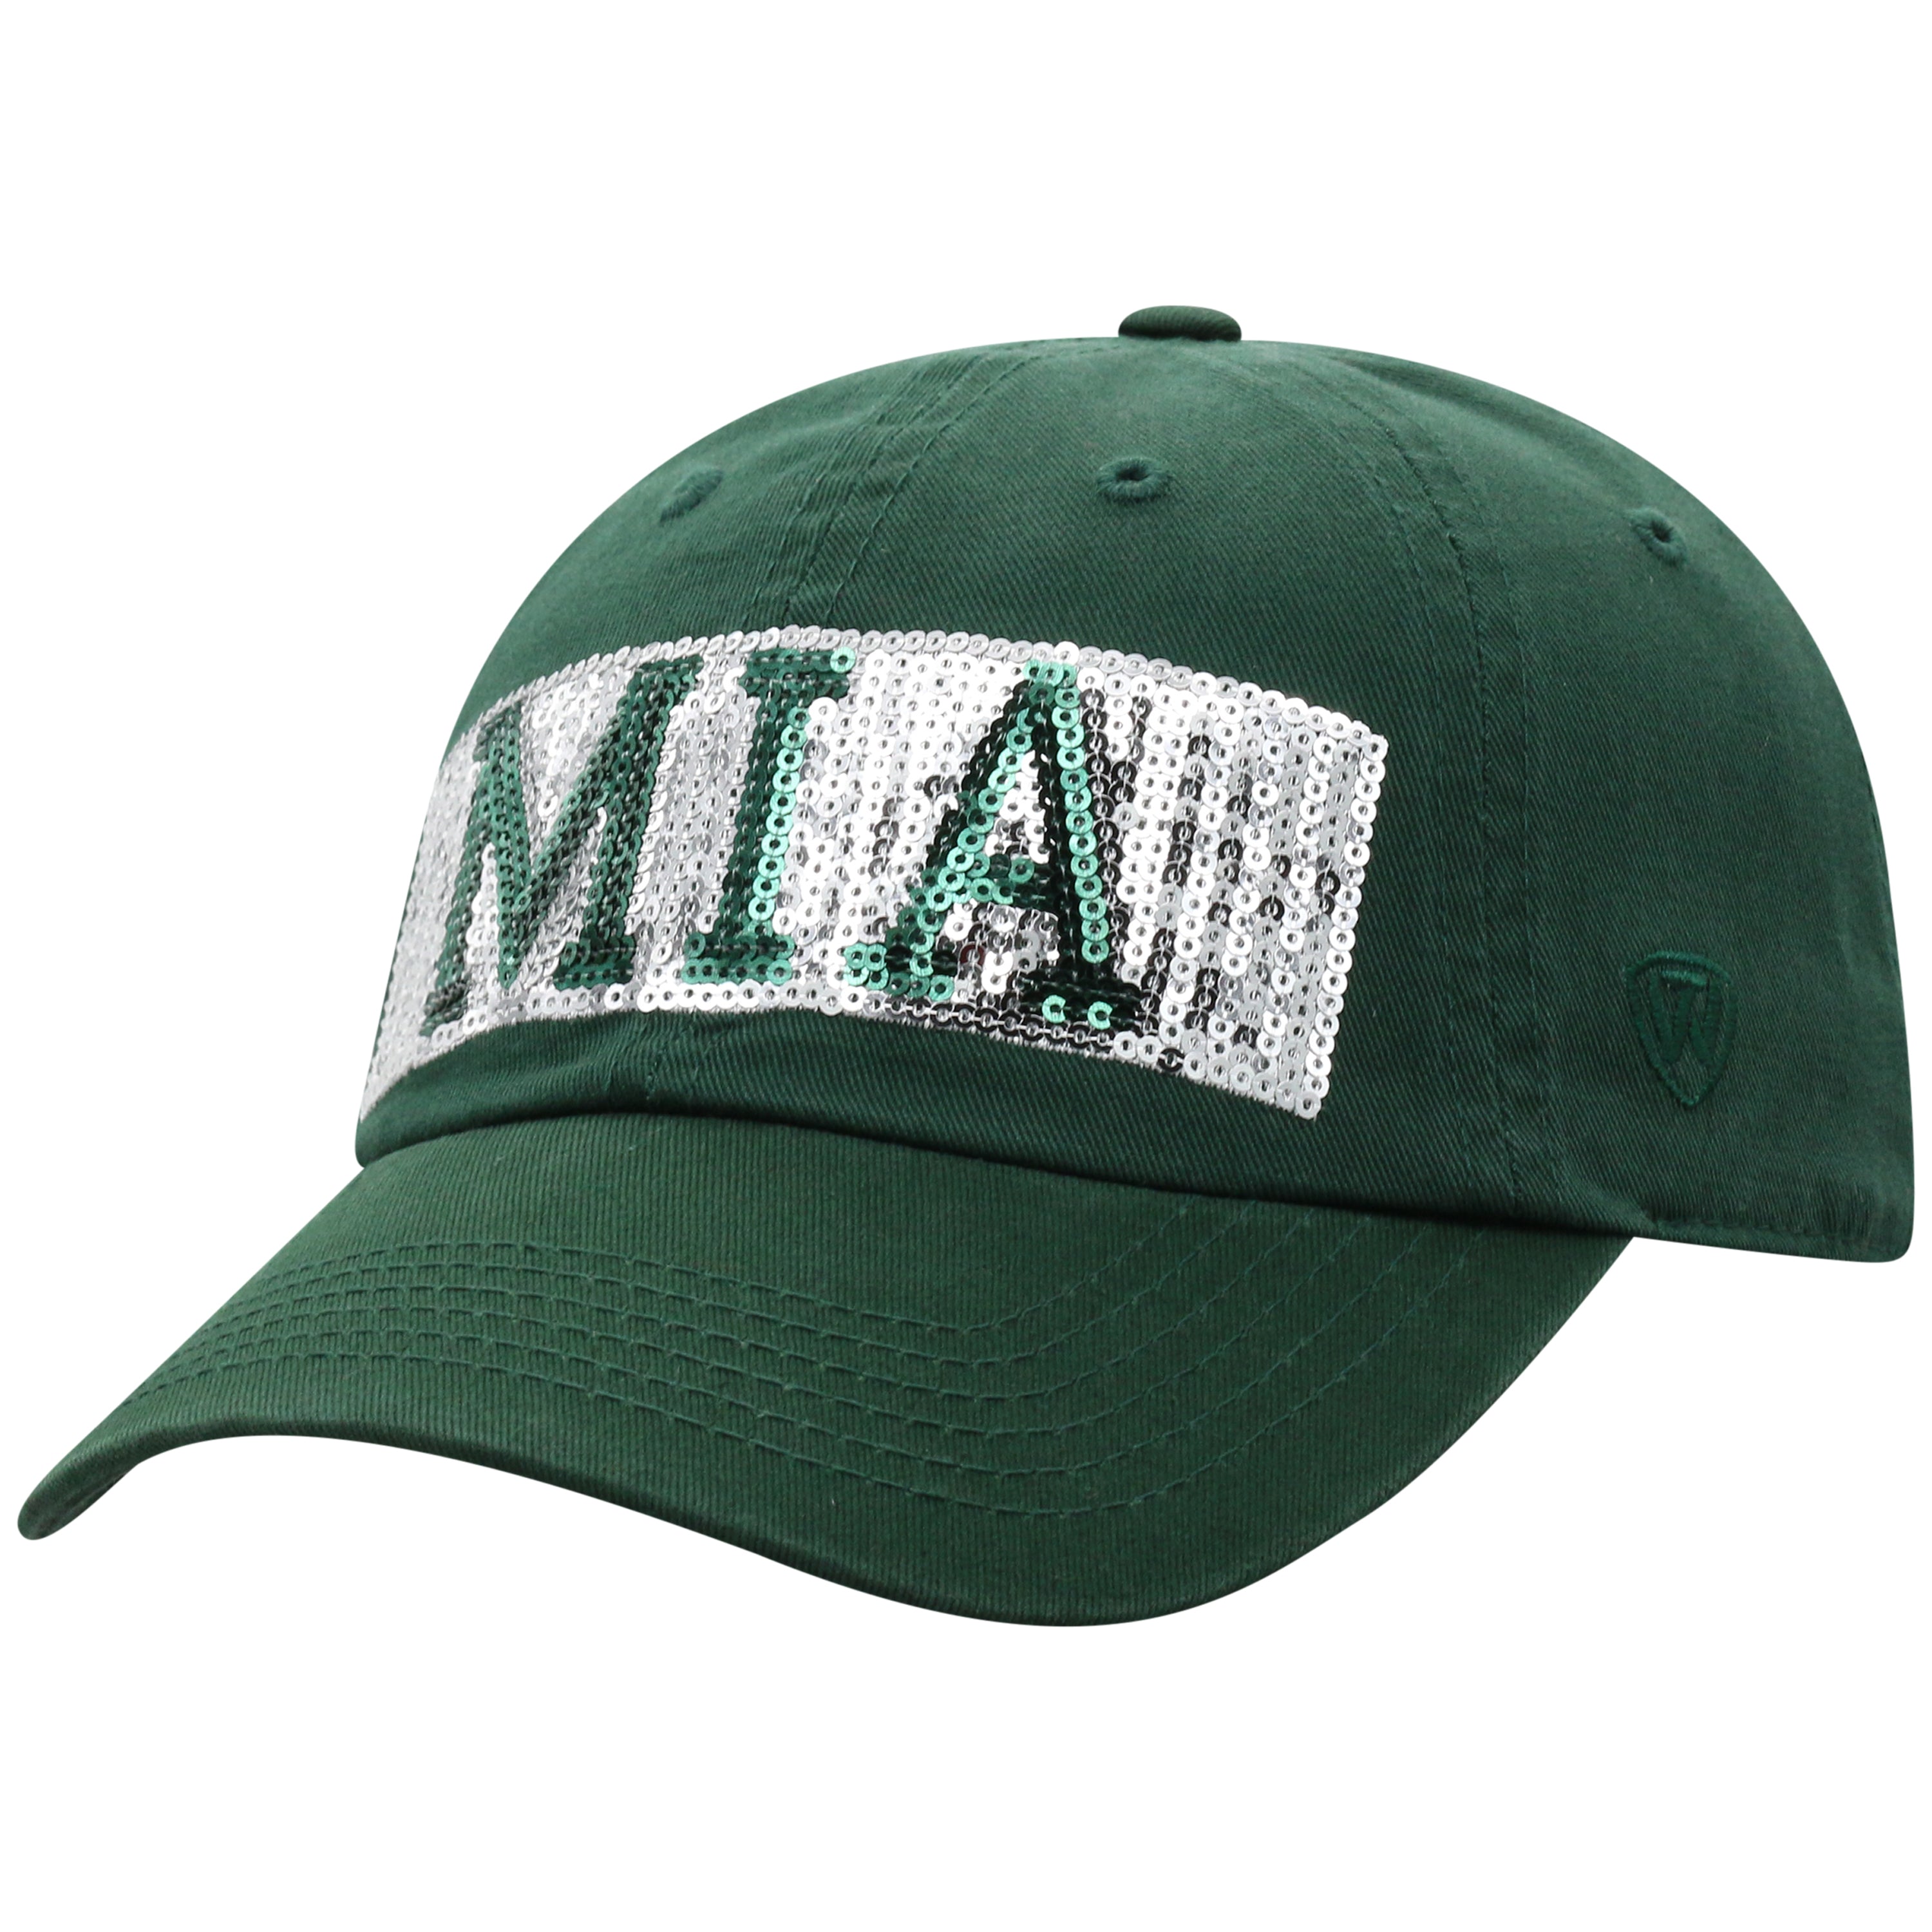 Miami Hurricanes Top of the World Tinsel Adjustable Women's Hat